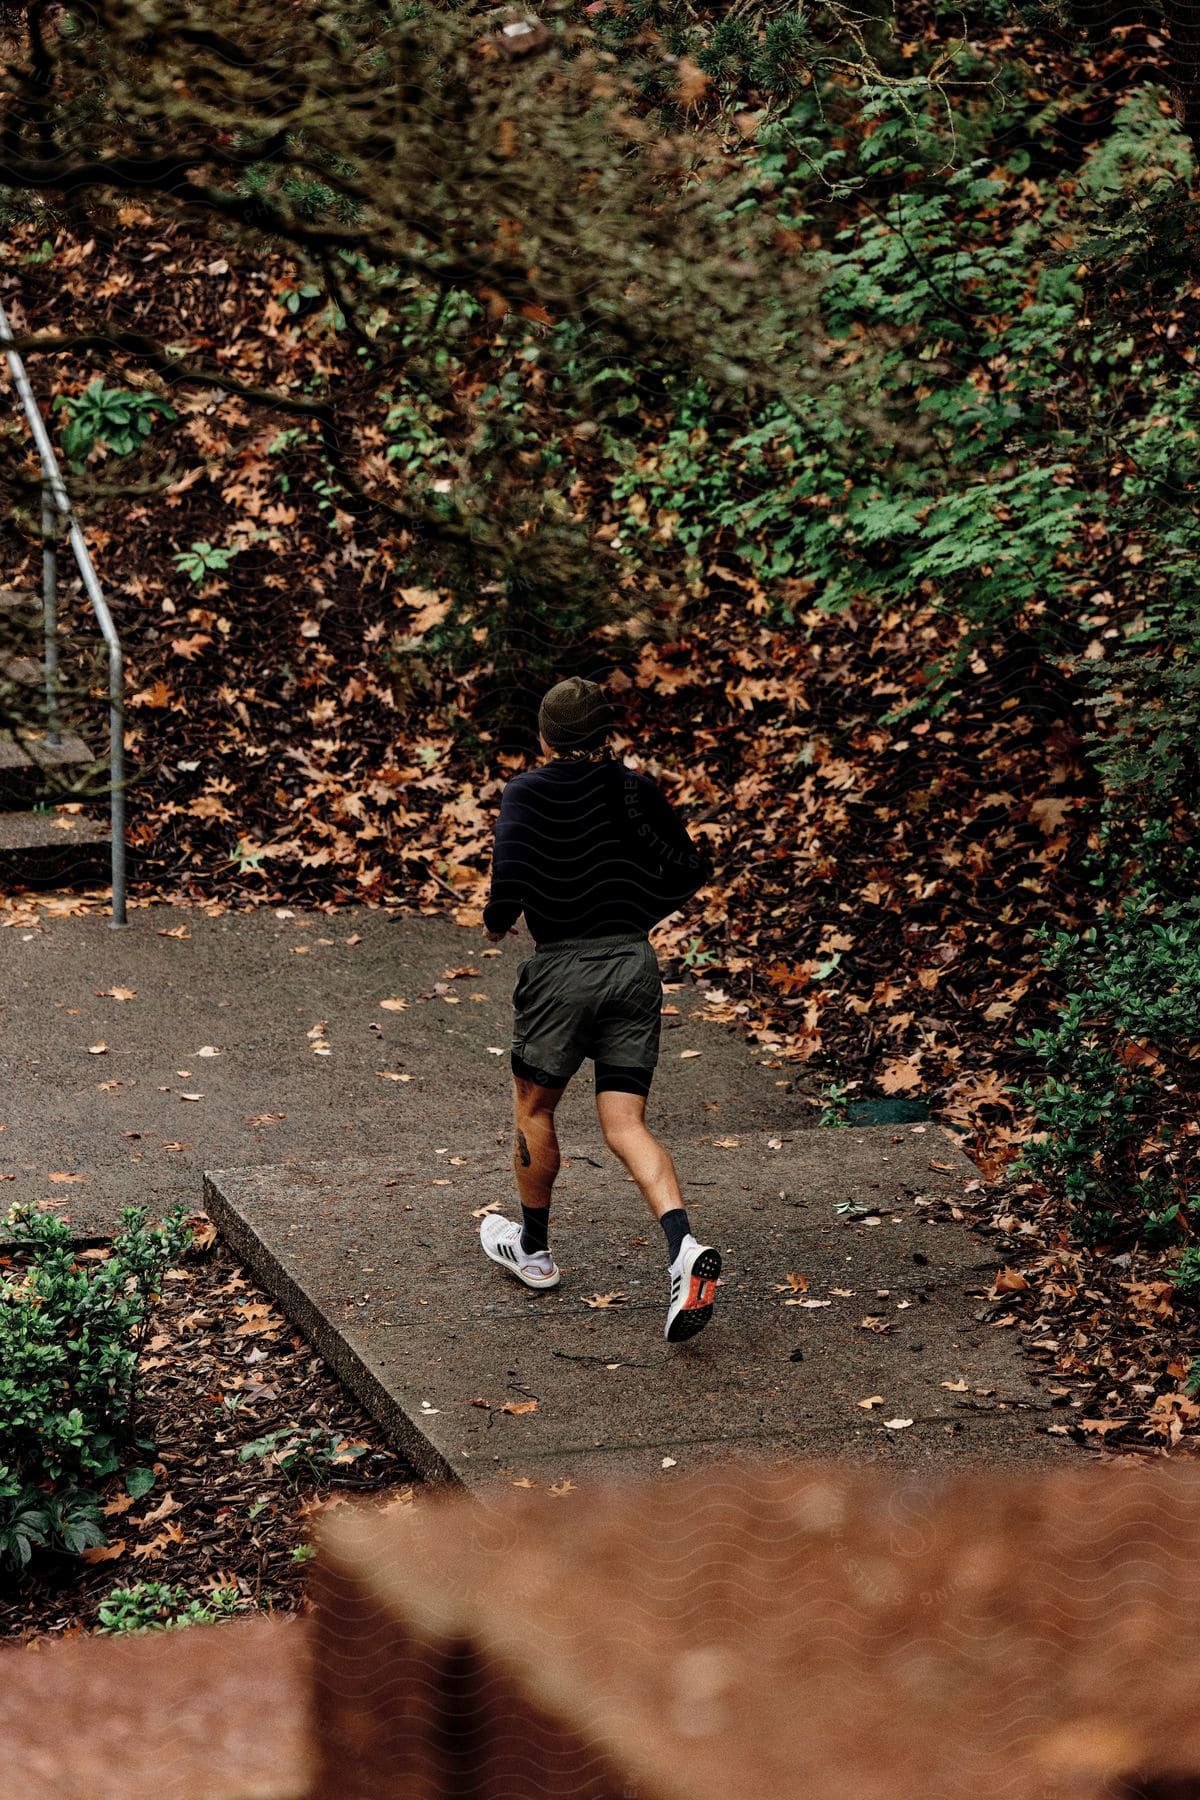 A man wearing shorts runs along a concrete pathway that is lined with fallen leafs.